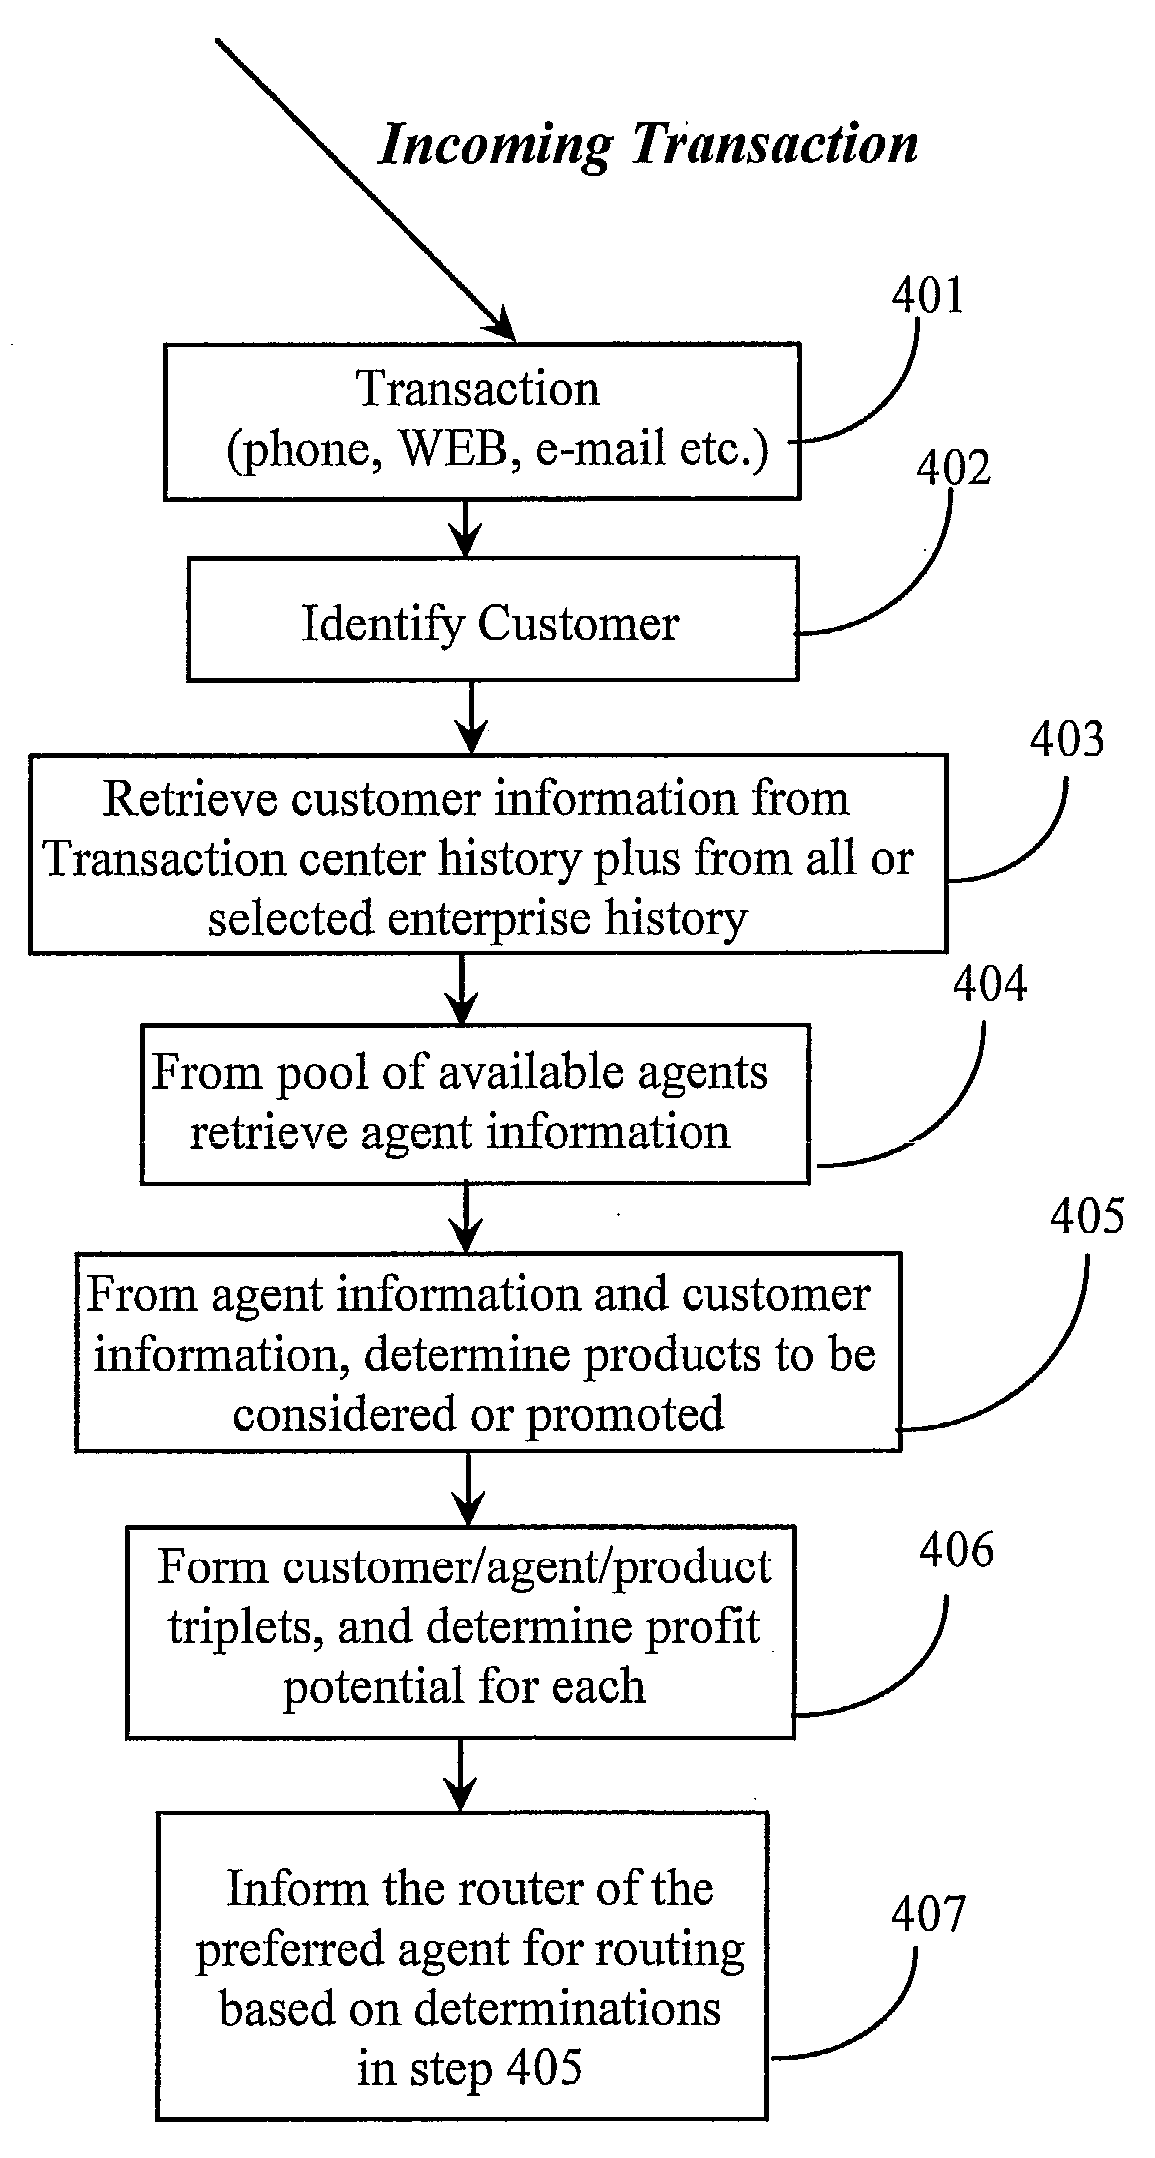 Method for Predictive Routing of Incoming Transactions Within a Communication Center According to Potential Profit Analysis